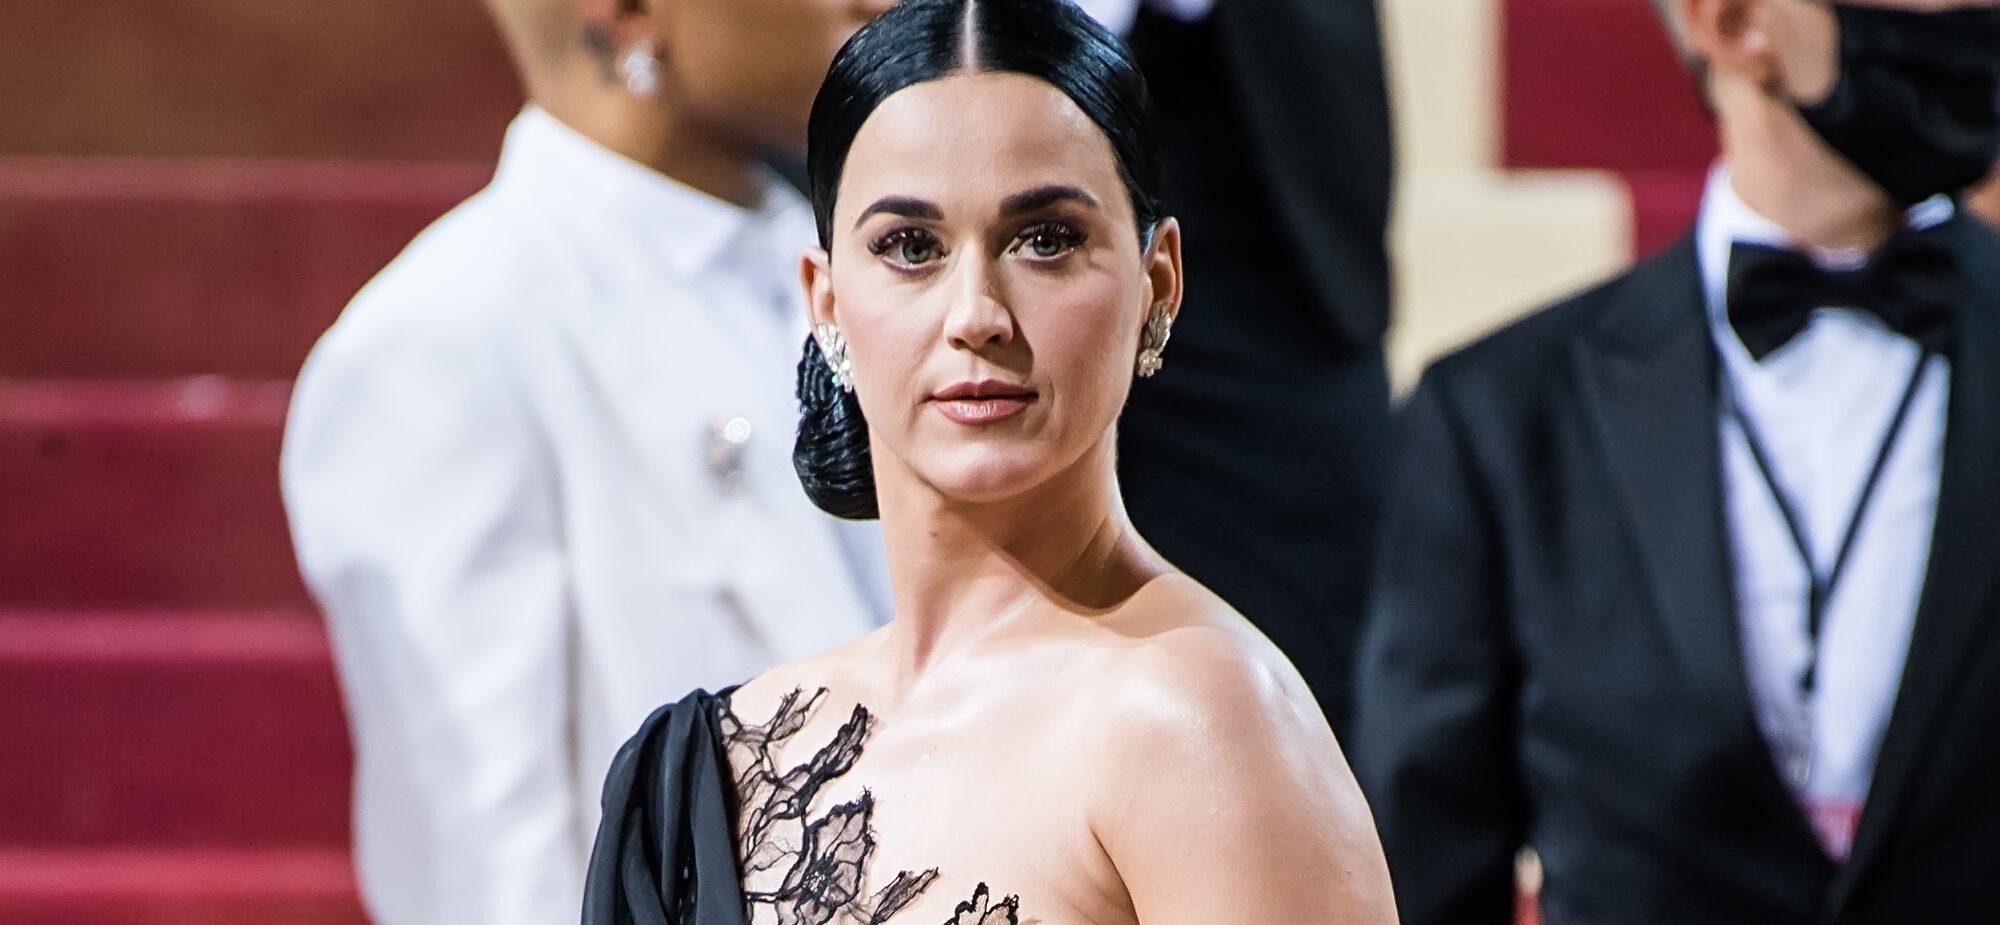 Katy Perry ‘Upset’ By Criticism From ‘American Idol’ Fans, Now Wants To Leave The Show